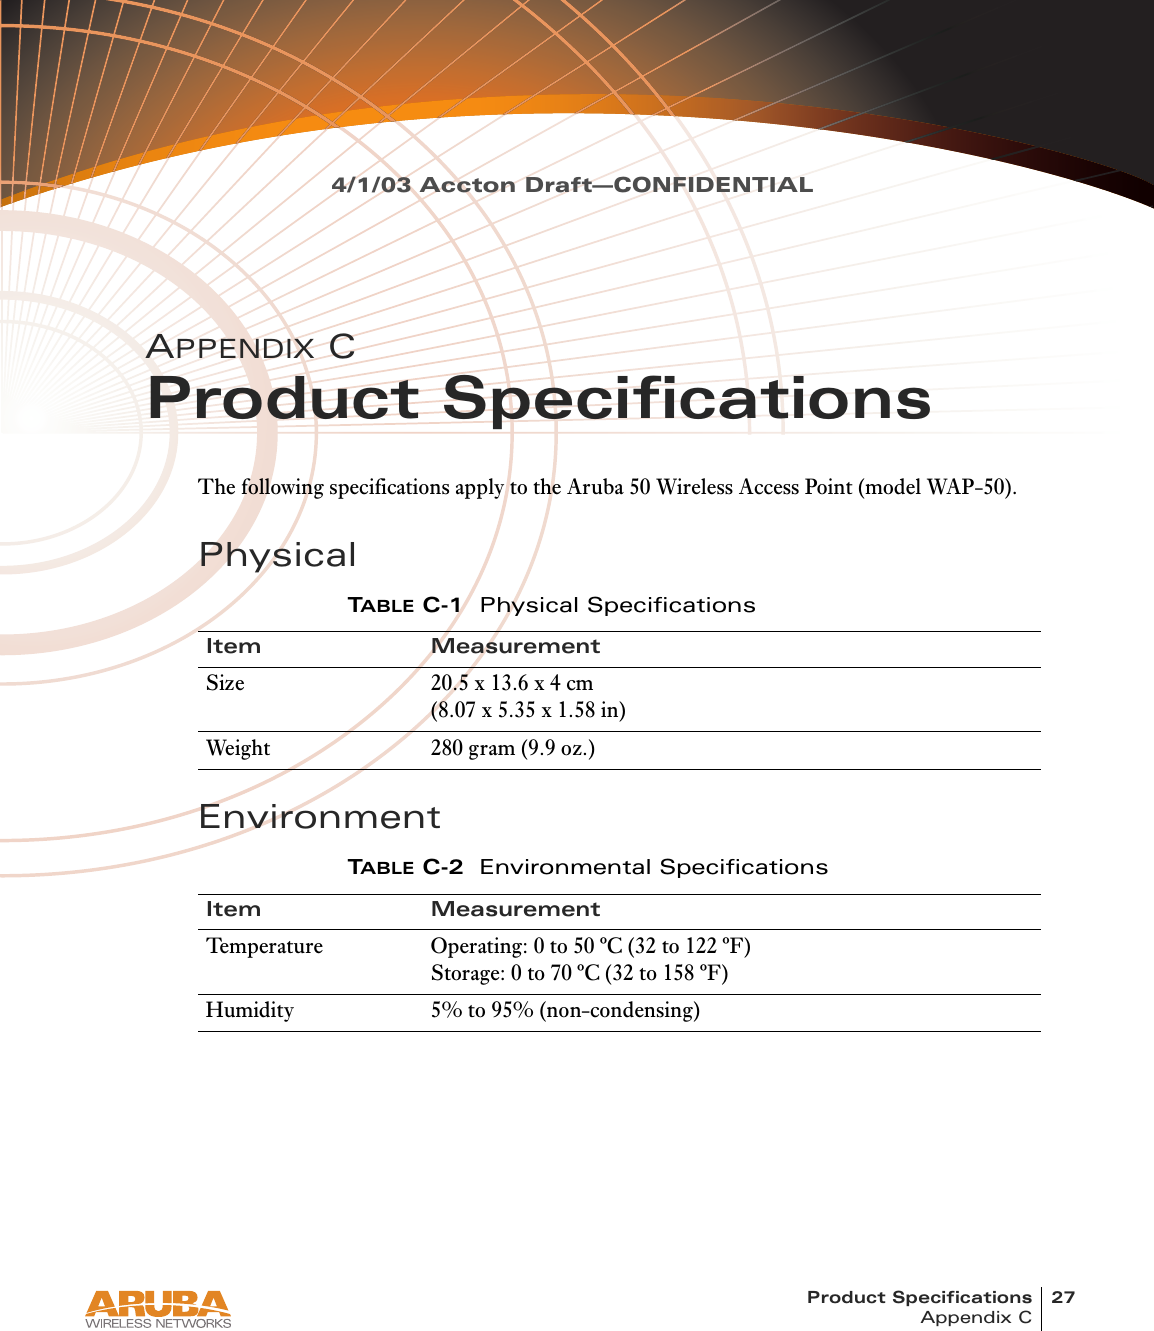 Product Specifications 27Appendix C4/1/03 Accton Draft—CONFIDENTIALAPPENDIX CProduct SpecificationsThe following specifications apply to the Aruba 50 Wireless Access Point (model WAP-50).PhysicalEnvironmentTABLE C-1 Physical SpecificationsItem MeasurementSize 20.5 x 13.6 x 4 cm(8.07 x 5.35 x 1.58 in)Weight 280 gram (9.9 oz.)TABLE C-2 Environmental SpecificationsItem MeasurementTemperature Operating: 0 to 50 ºC (32 to 122 ºF)Storage: 0 to 70 ºC (32 to 158 ºF)Humidity 5% to 95% (non-condensing)